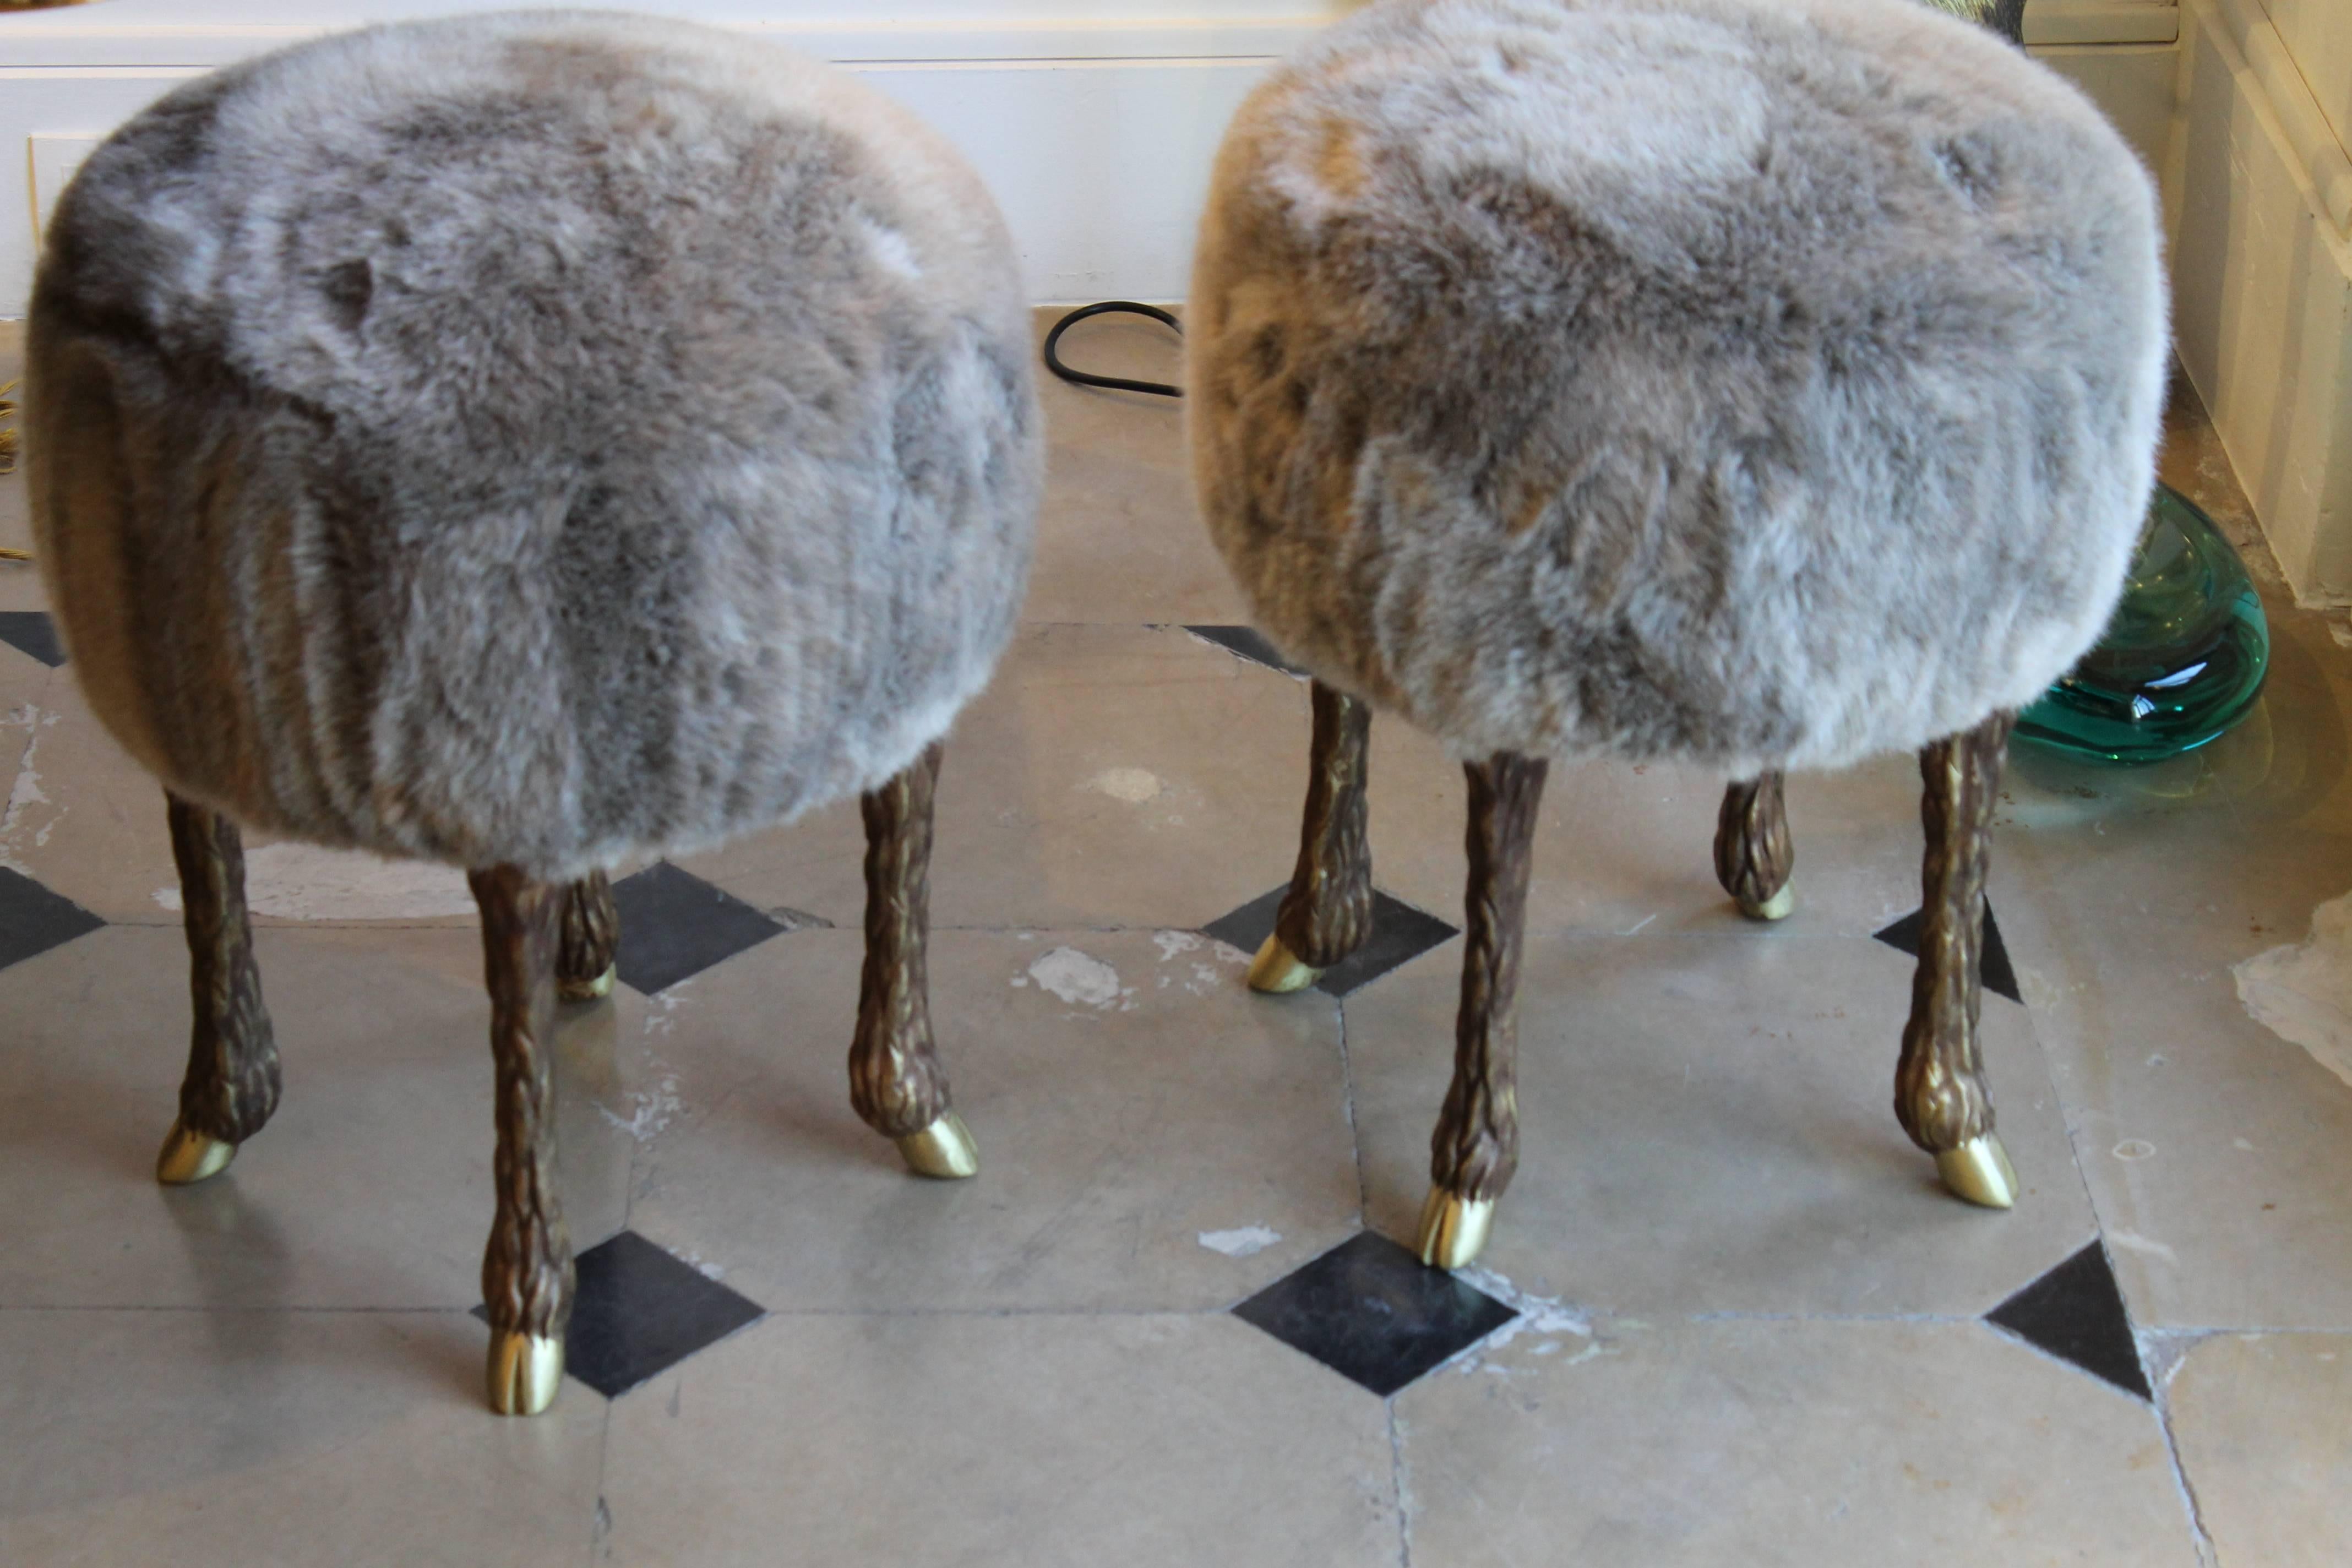 RC Bankowsky.

Marc Bankowsky.
Pair of stools.

Eco-fur, patinated bronze feet.

Measures: H 53 cm; D 40 cm.
Signed,

France, 2016.